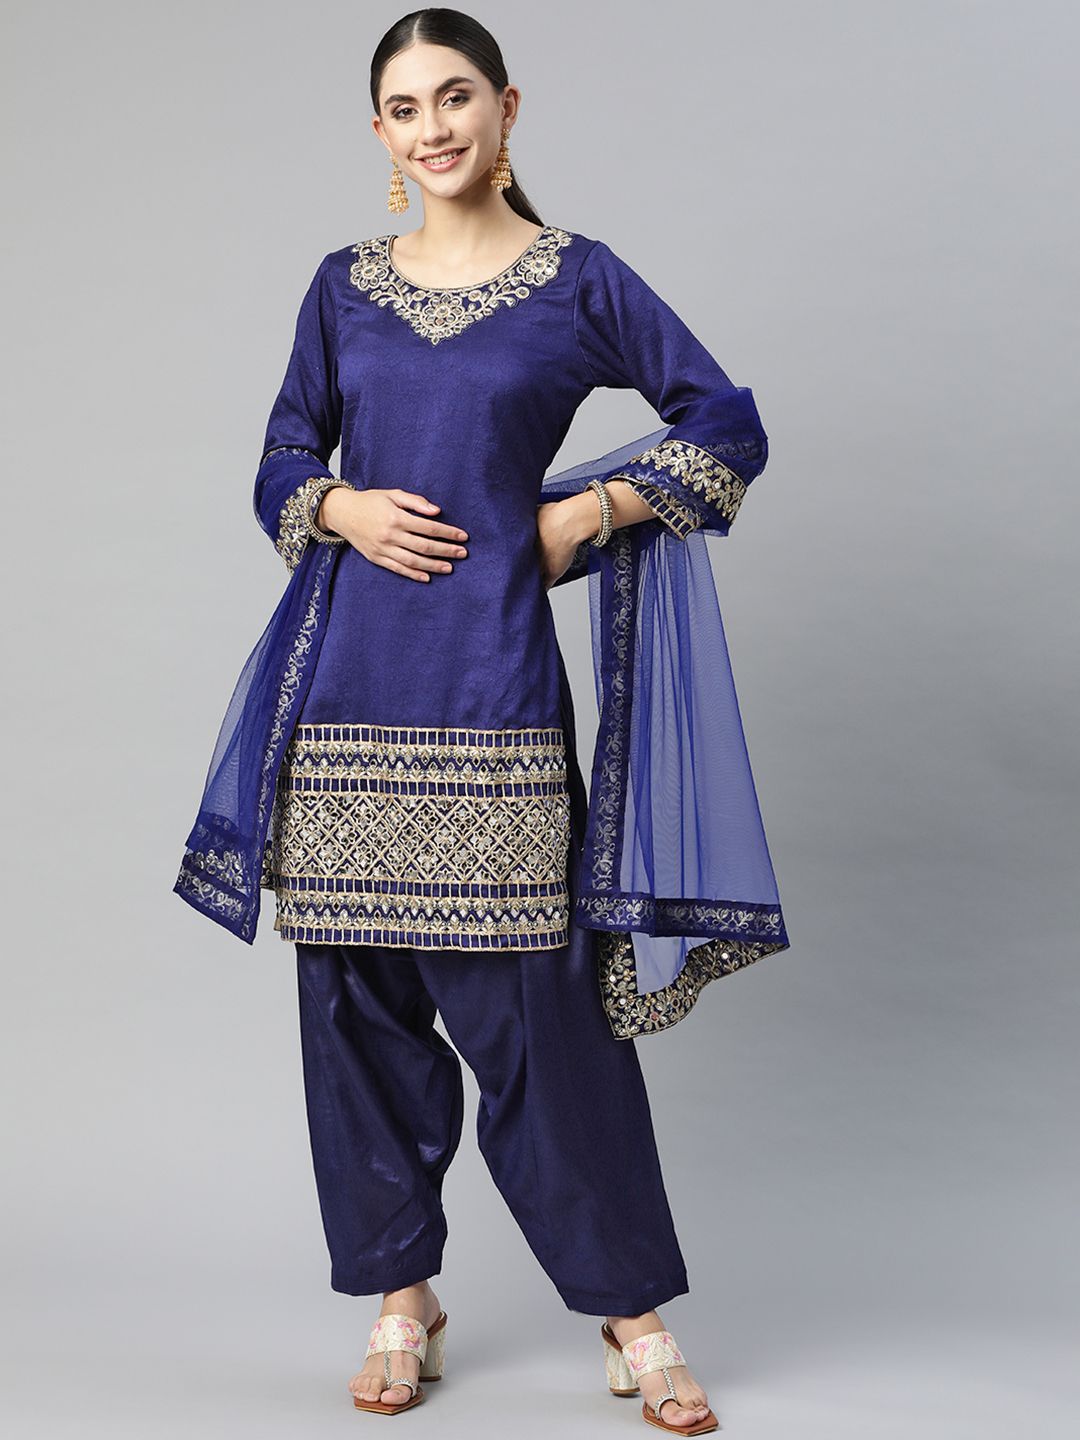 Readiprint Fashions Navy Blue Embroidered Art Silk Semi-Stitched Dress Material Price in India